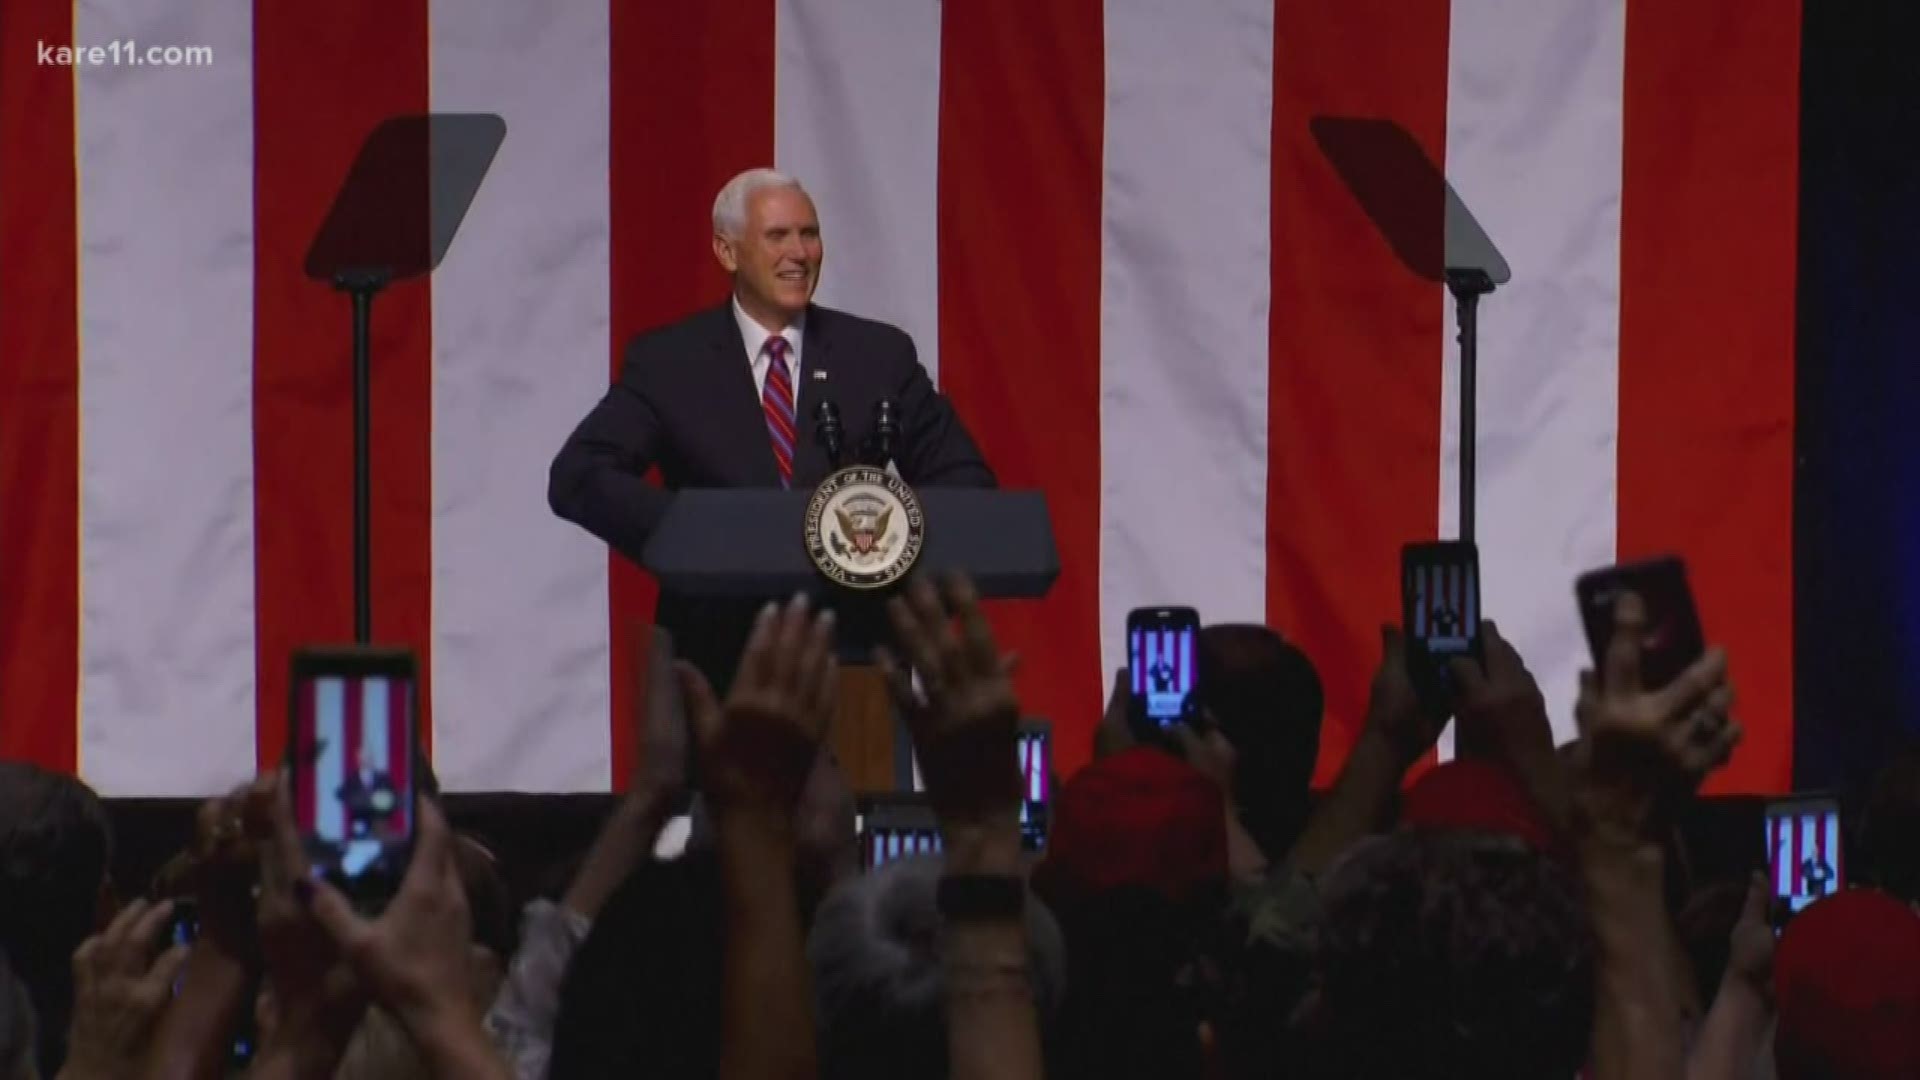 Pence will join the president during the rally at Target Center.